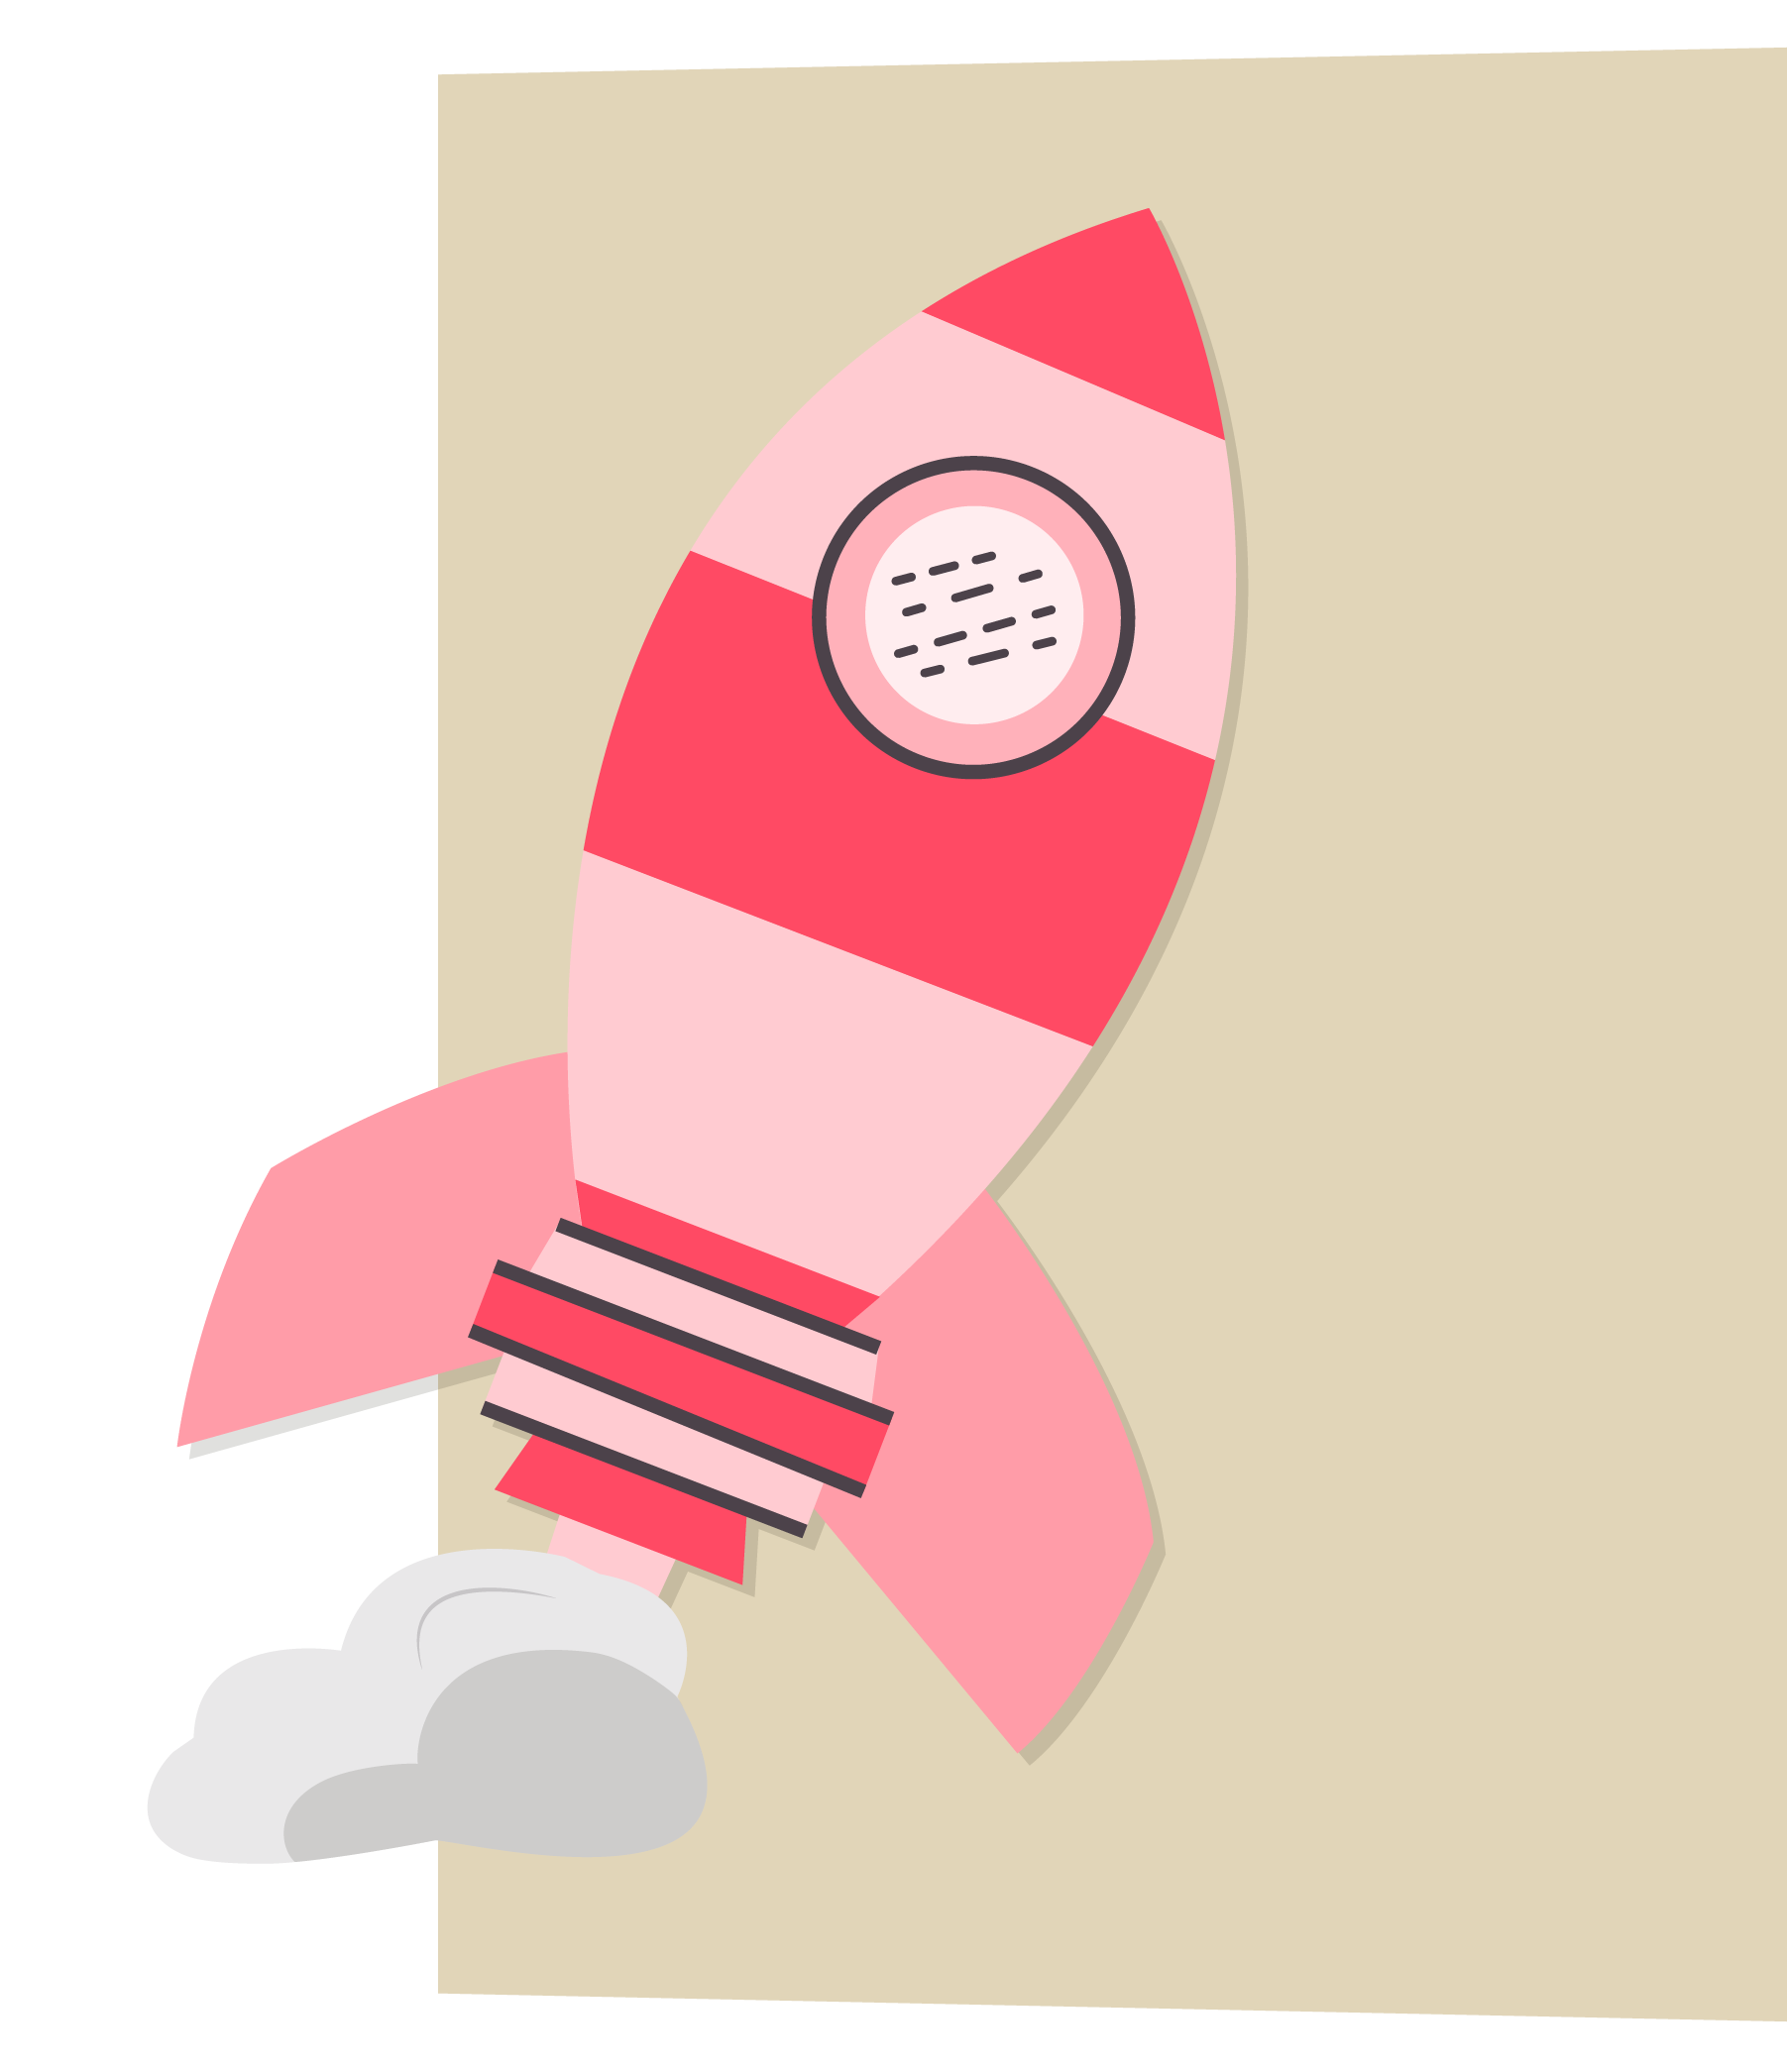 Momice_ABC_Visuals_ThankYou_page_rocket_red